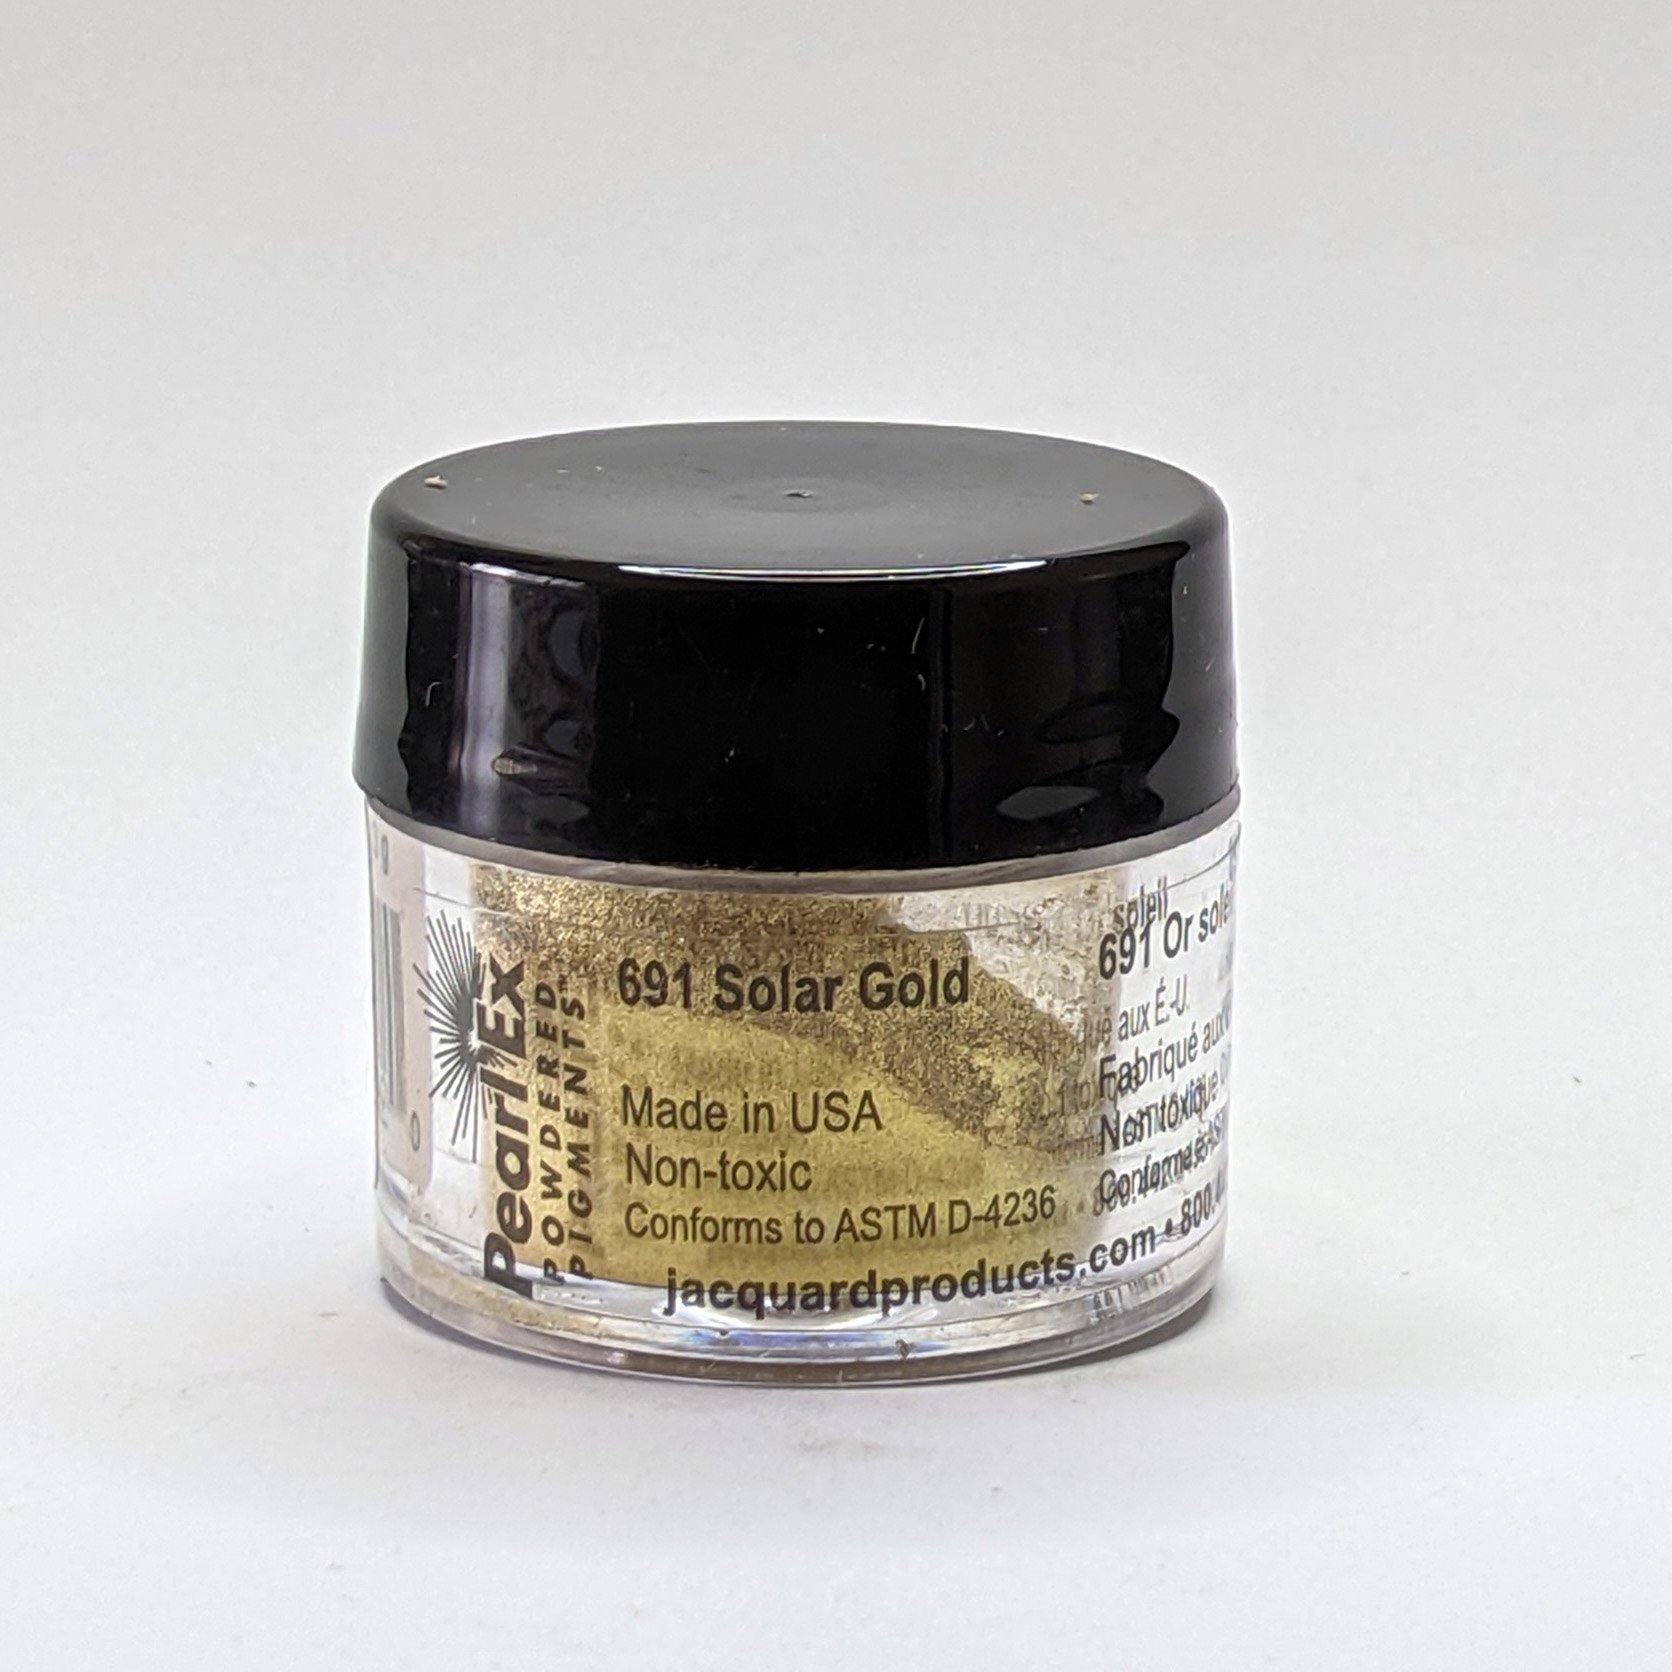 Solar Gold Pearl Ex Pigment 3g - Poethan